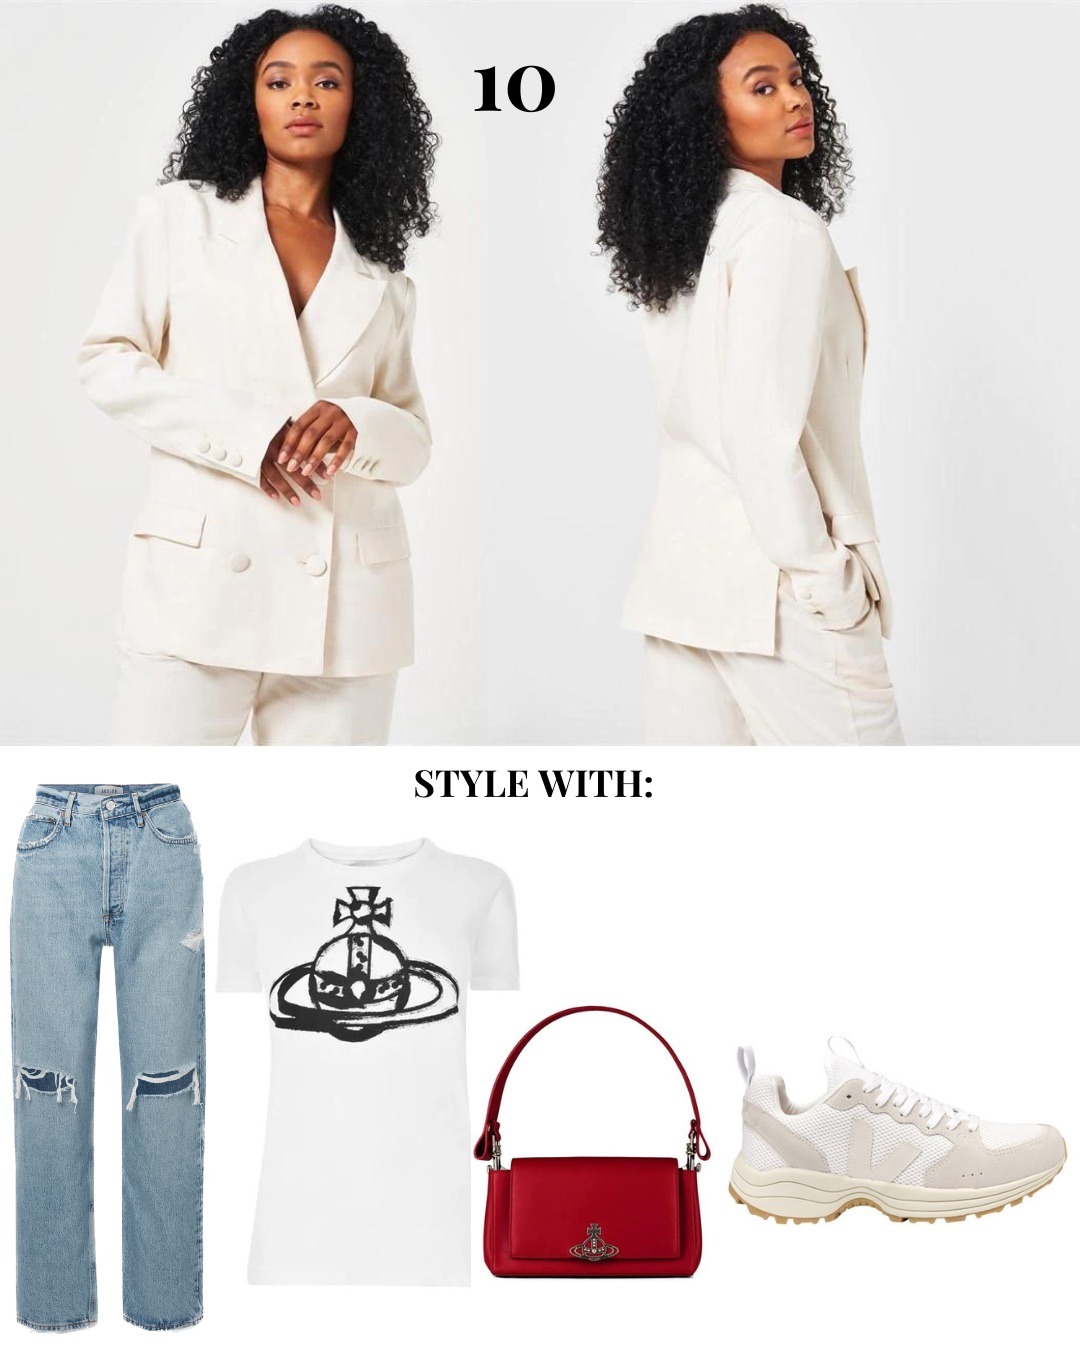 Linen blazer styled with jeans, white tee, red handbag and trainers.